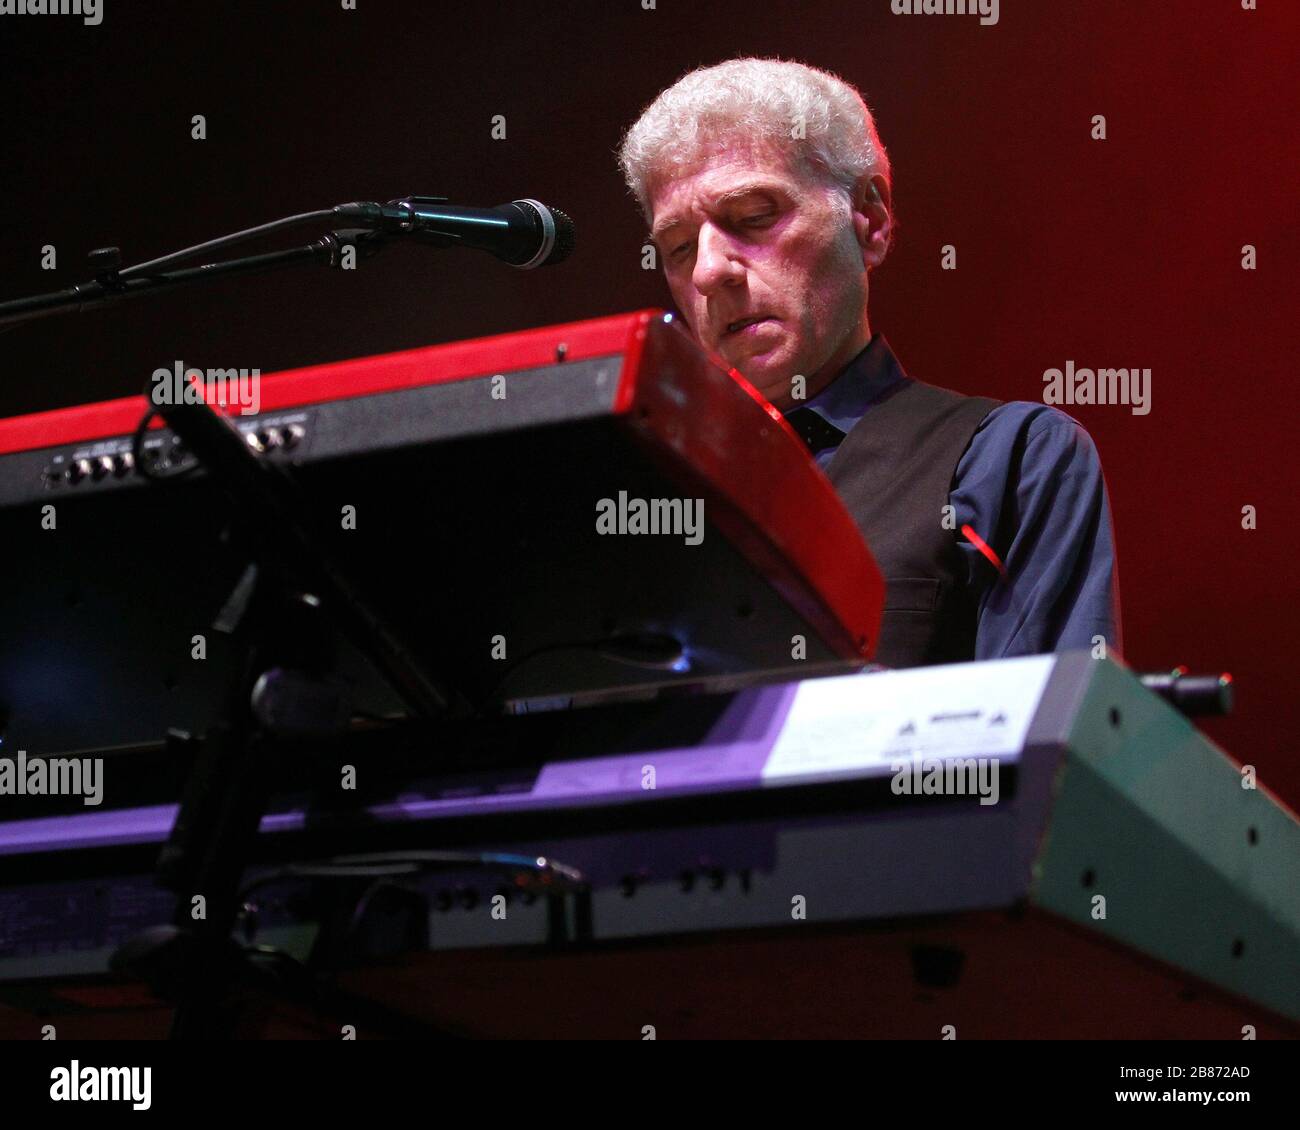 Former Styx band member Dennis DeYoung performs at the Seminole Hard Rock Live Arena in Hollywood, Florida. Stock Photo